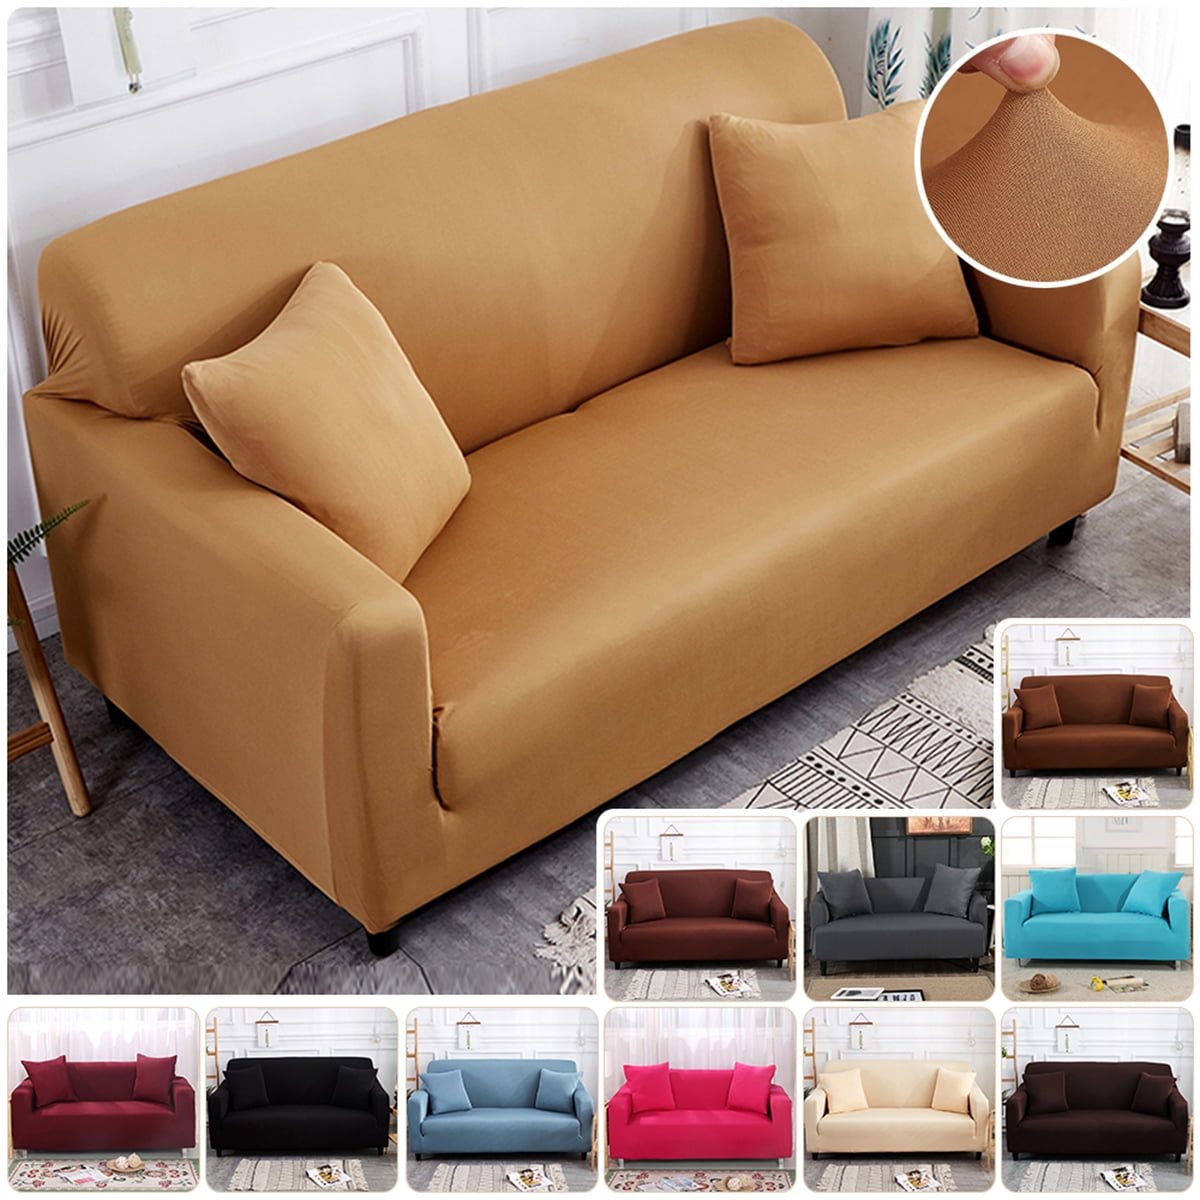 Details about   1/2/3/4 Seater Plain Elastic Soft Sofa Couch Cover Stretch Slipcover Protector 